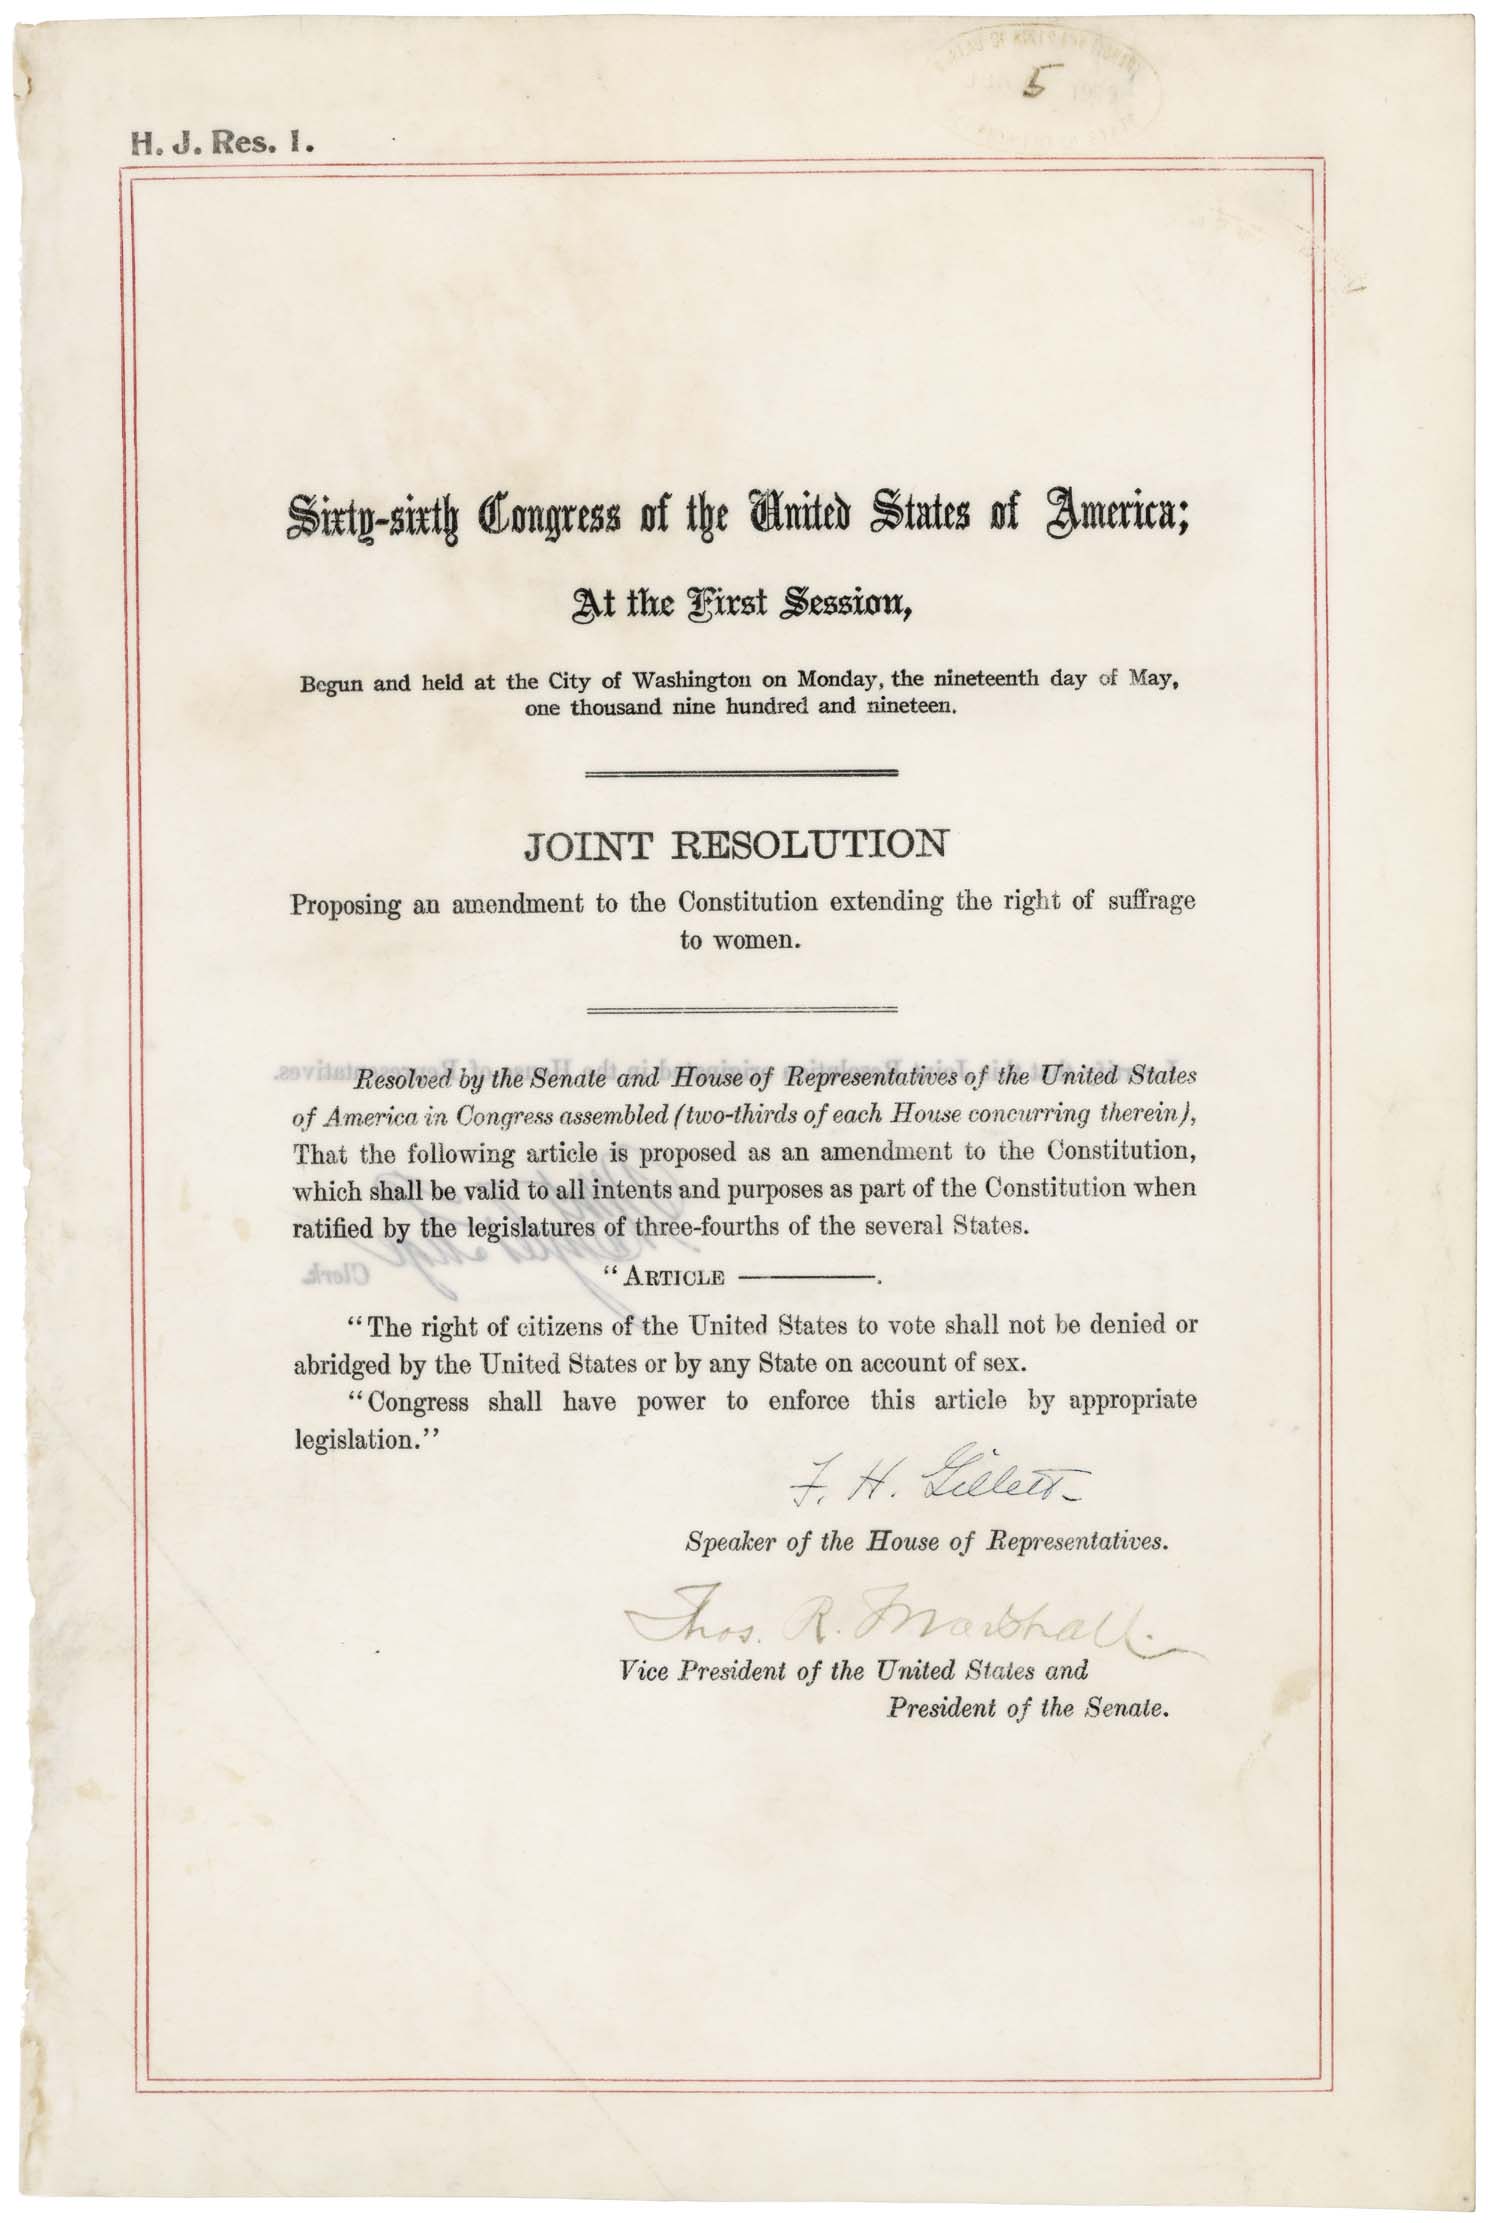 19th Amendment to the US Constitution